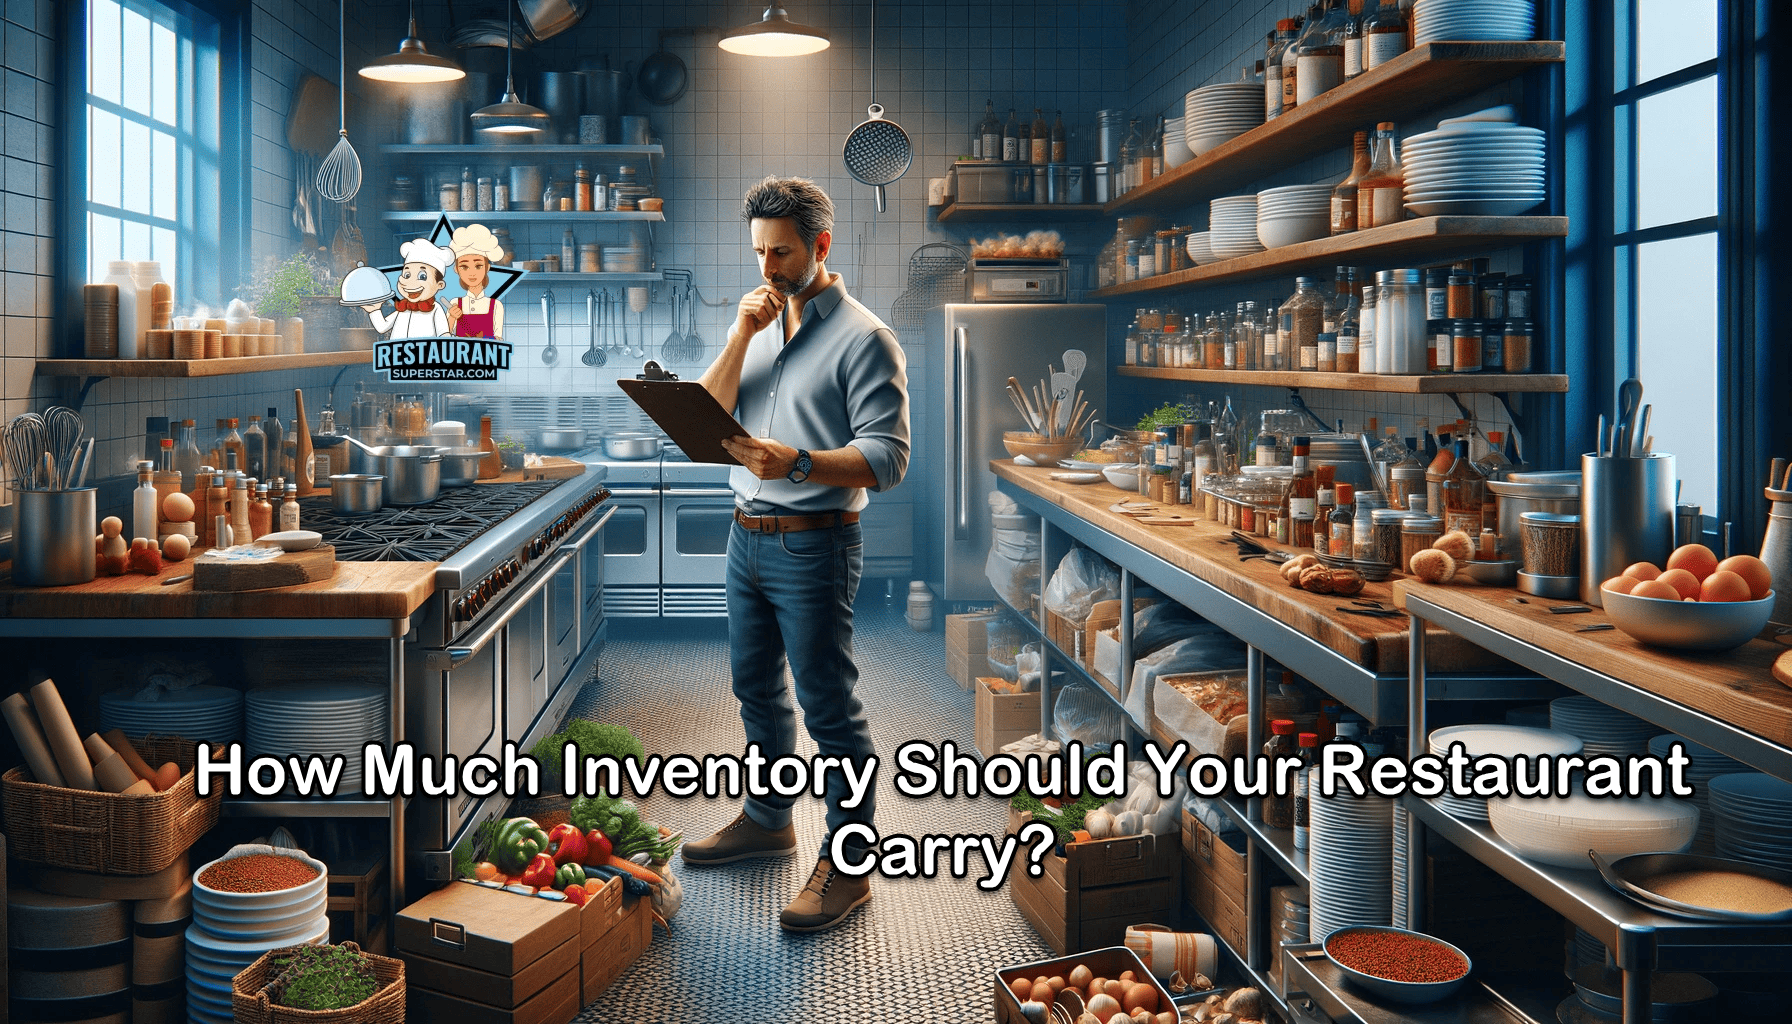 How Much Inventory Should Your Restaurant Carry?